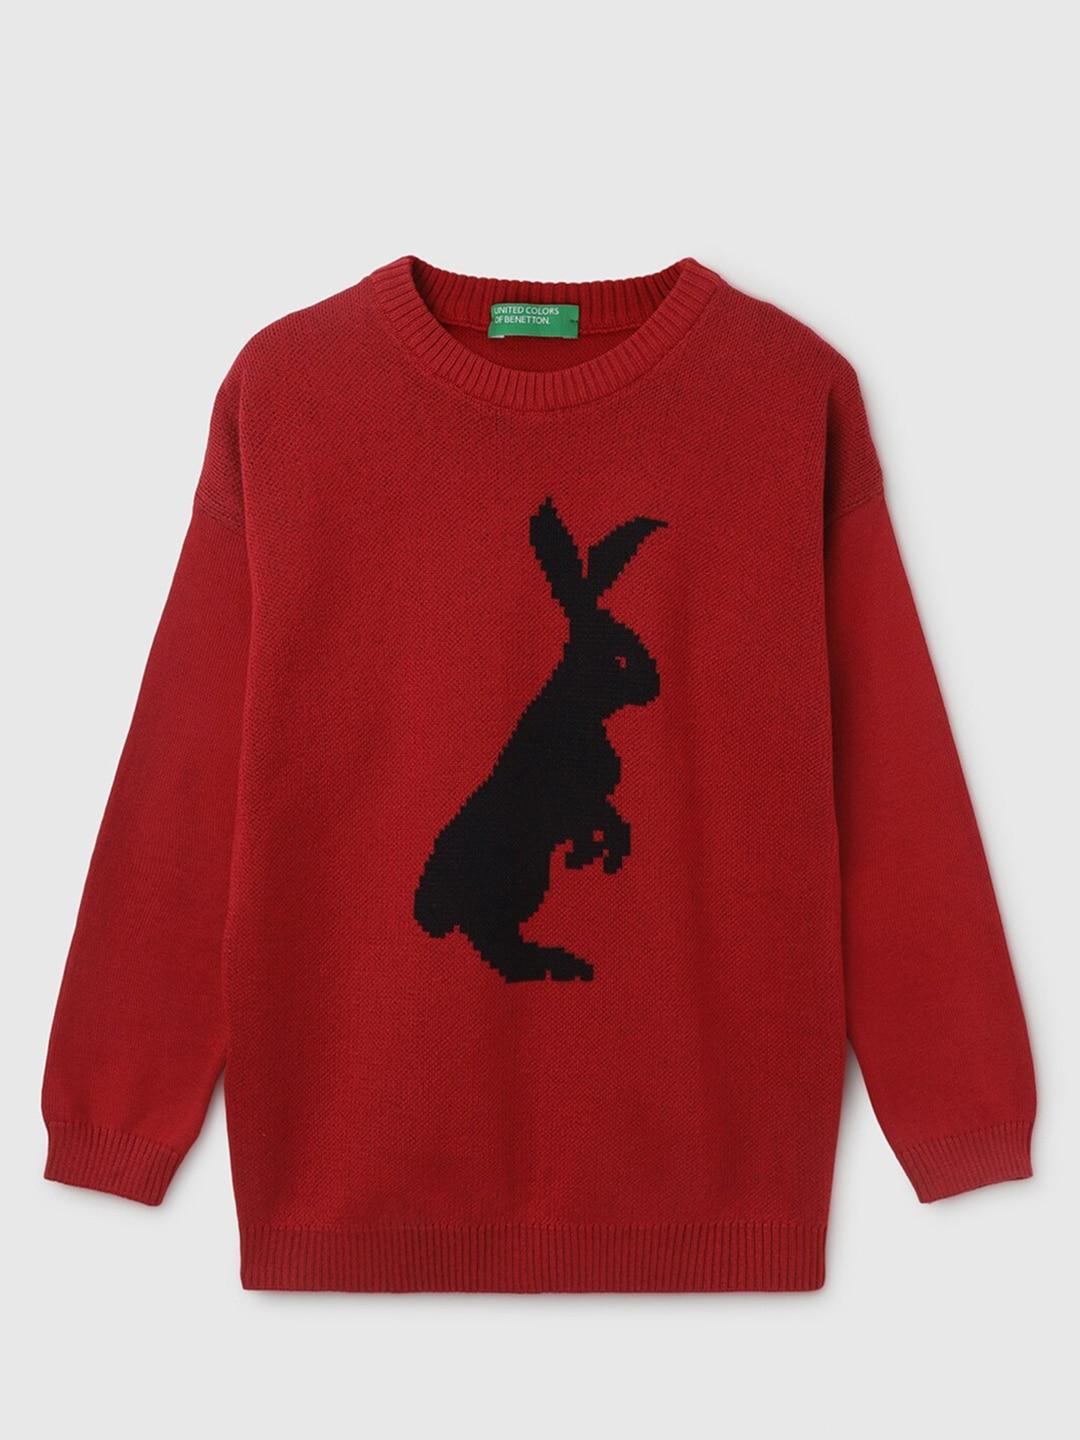 united-colors-of-benetton-boys-red-&-black-printed-pullover